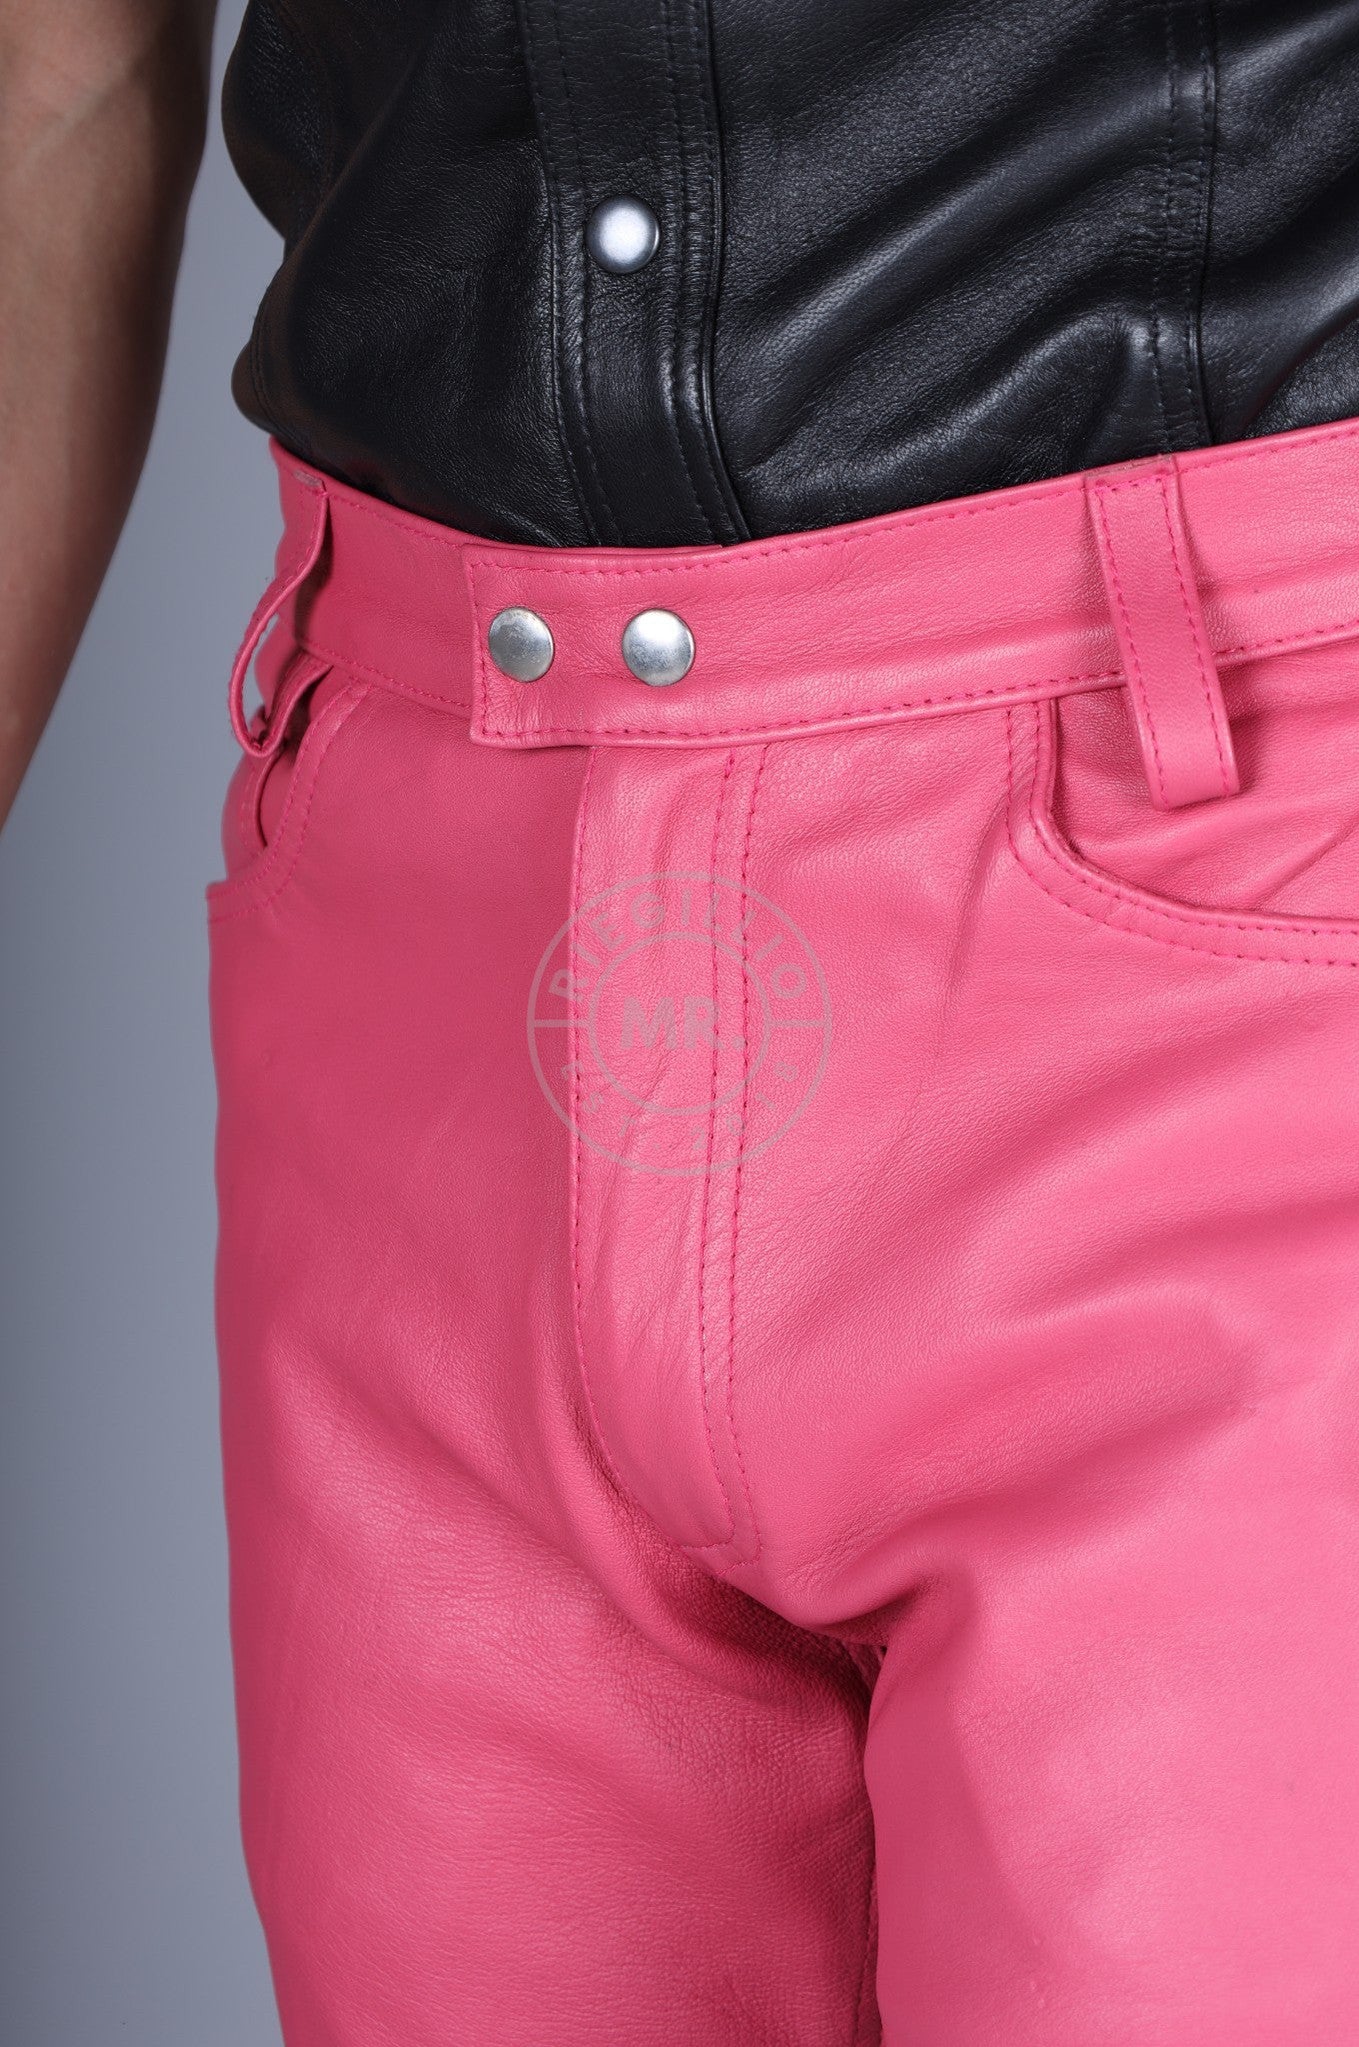 Pink Leather Bootcut Pants at MR. Riegillio